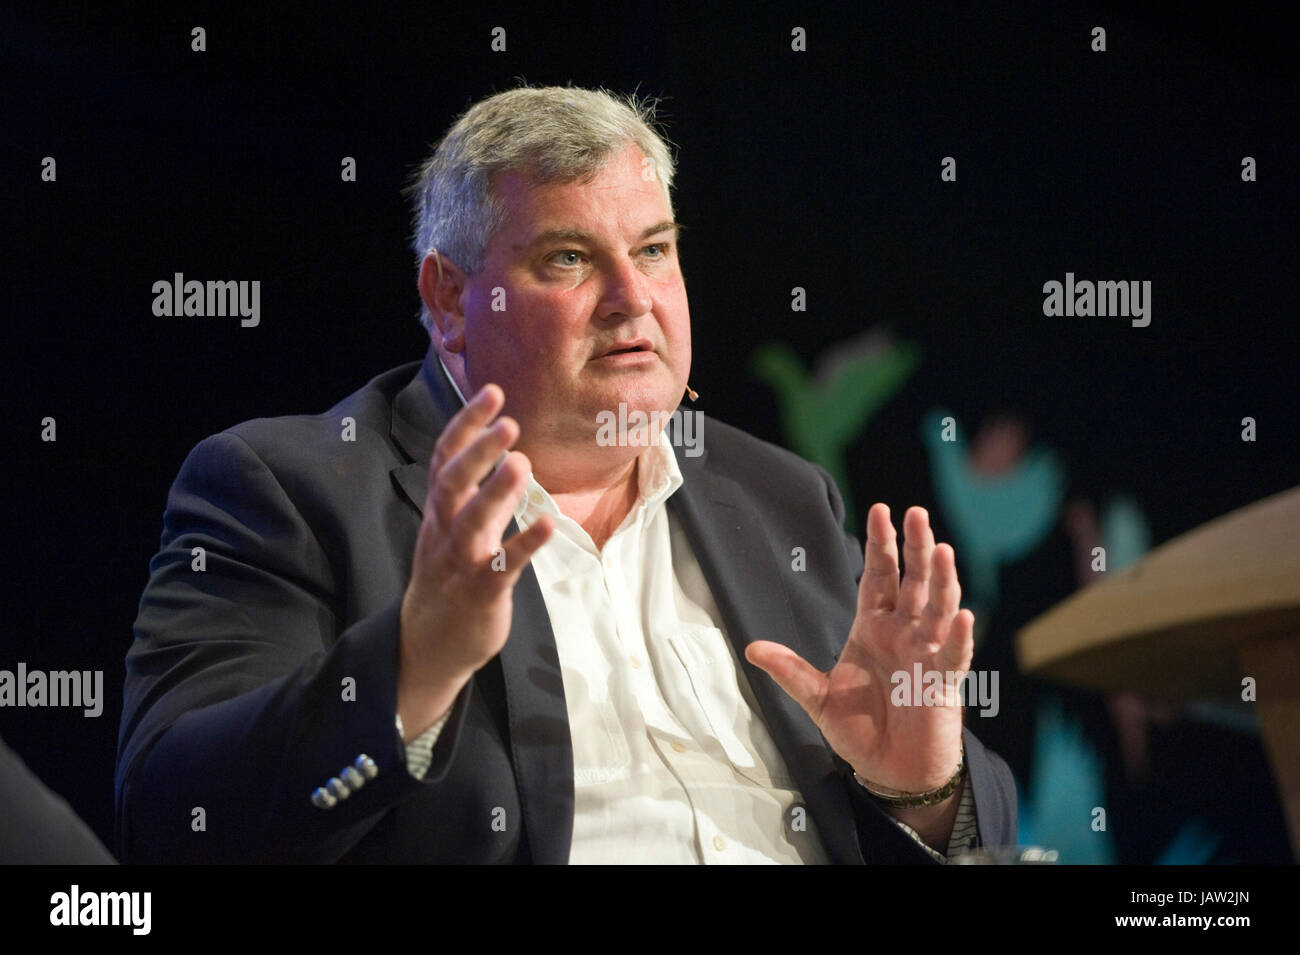 Mark Price British businessman & Minister of State for Trade & Investment speaking on stage at Hay Festival 2017 Hay-on-Wye Powys Wales UK Stock Photo